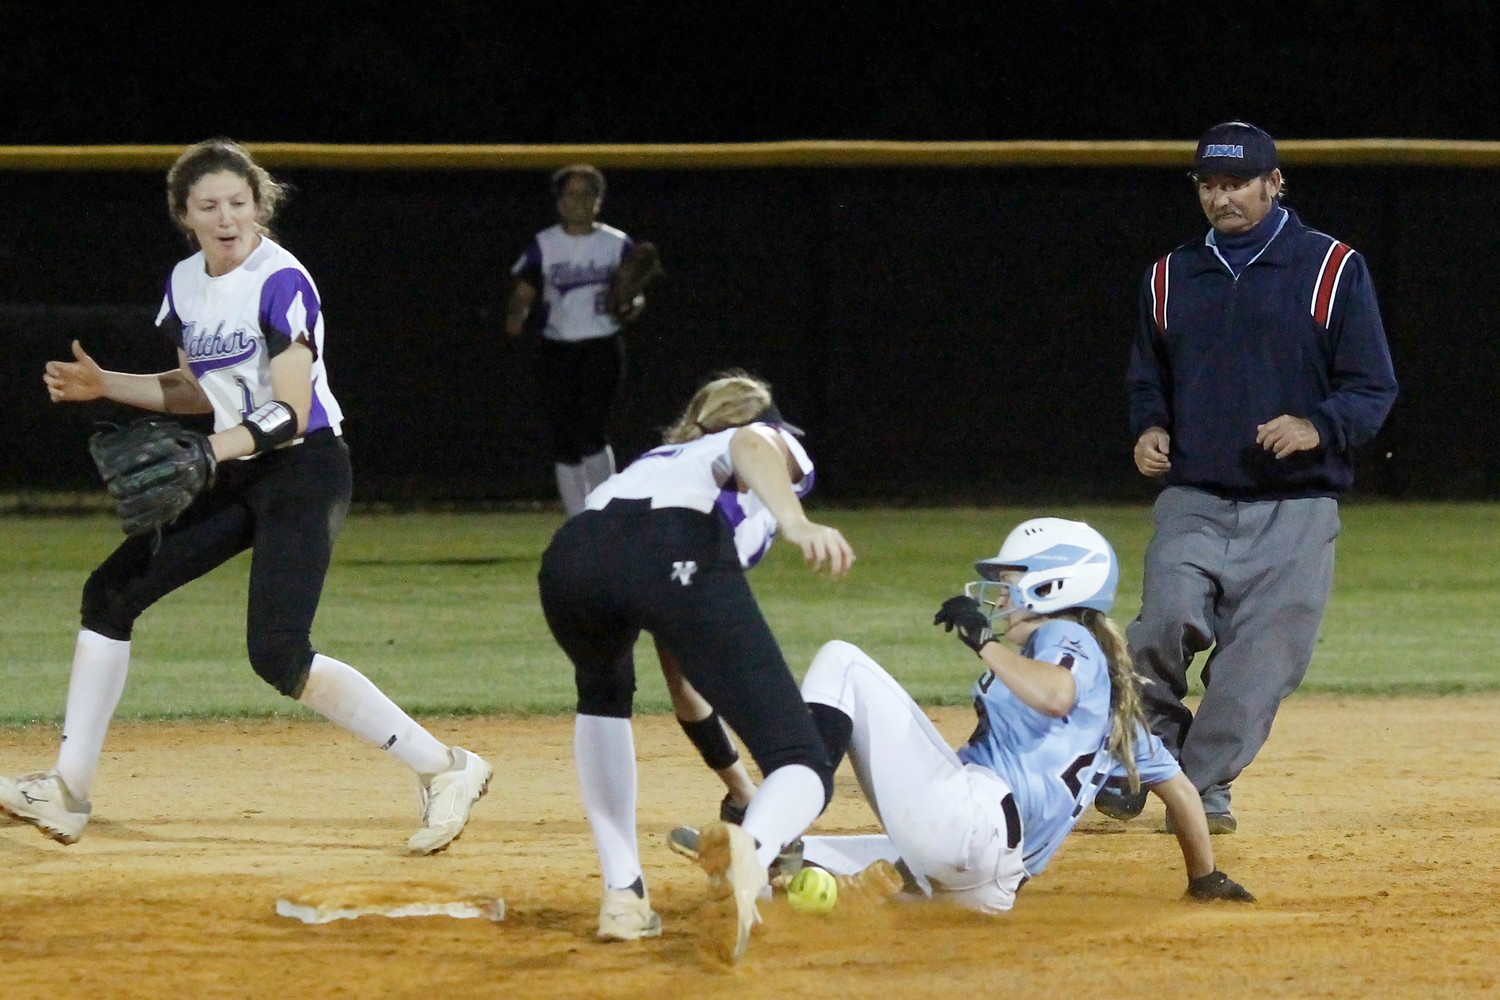 Kiley Hennesey of Ponte Vedra slides safely into second on a steal.